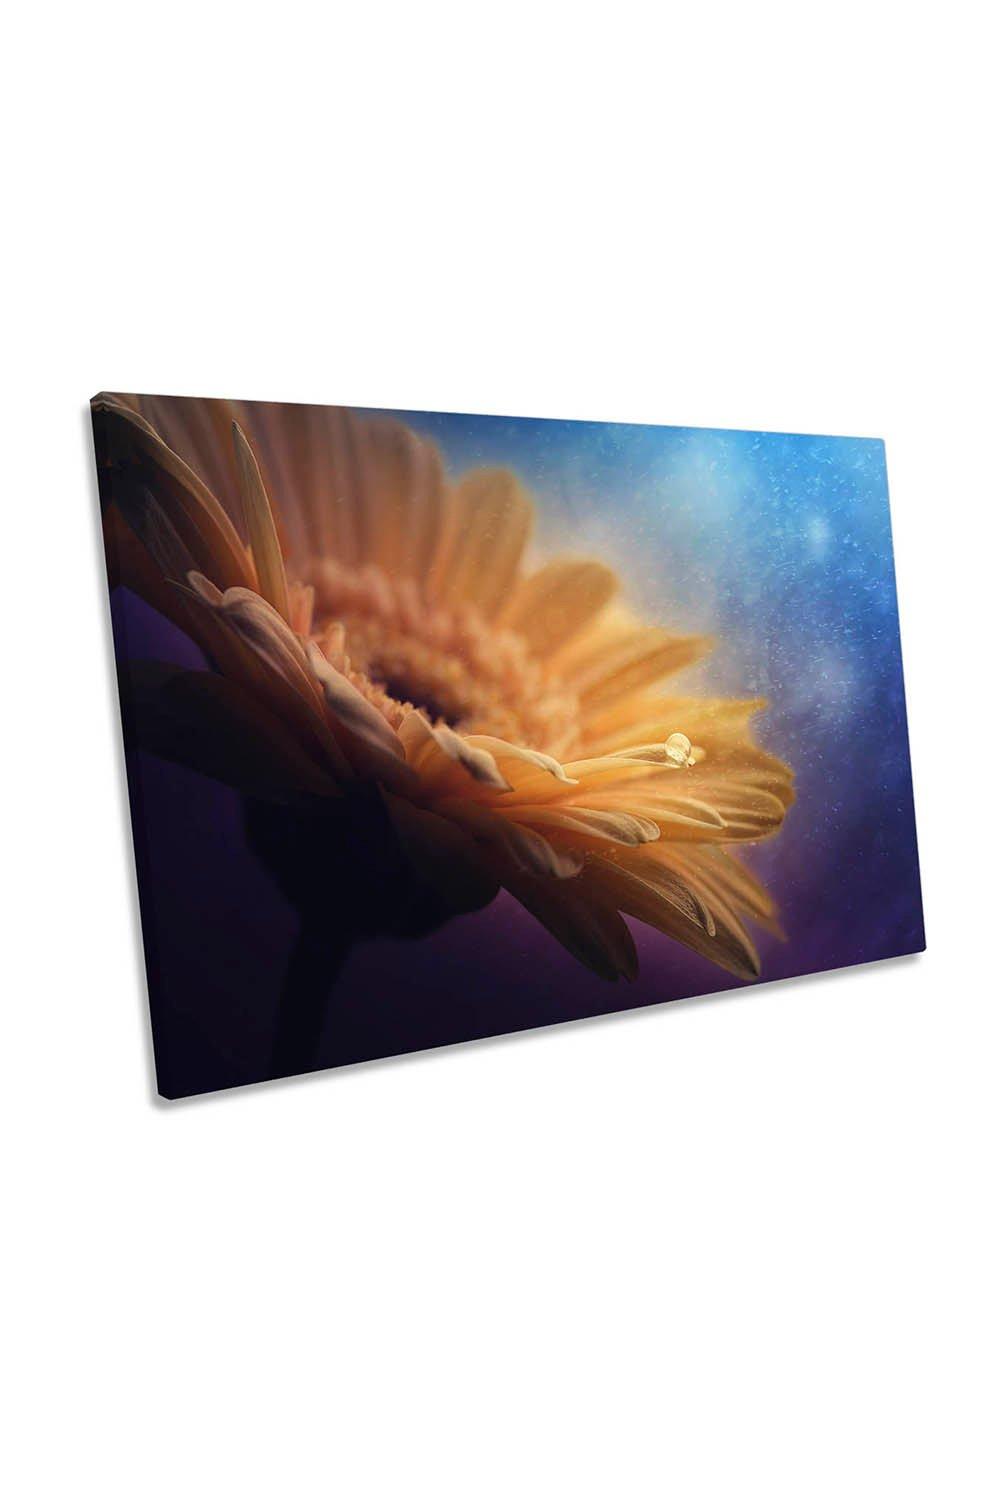 Universe Flower Floral Fantasy Canvas Wall Art Picture Print